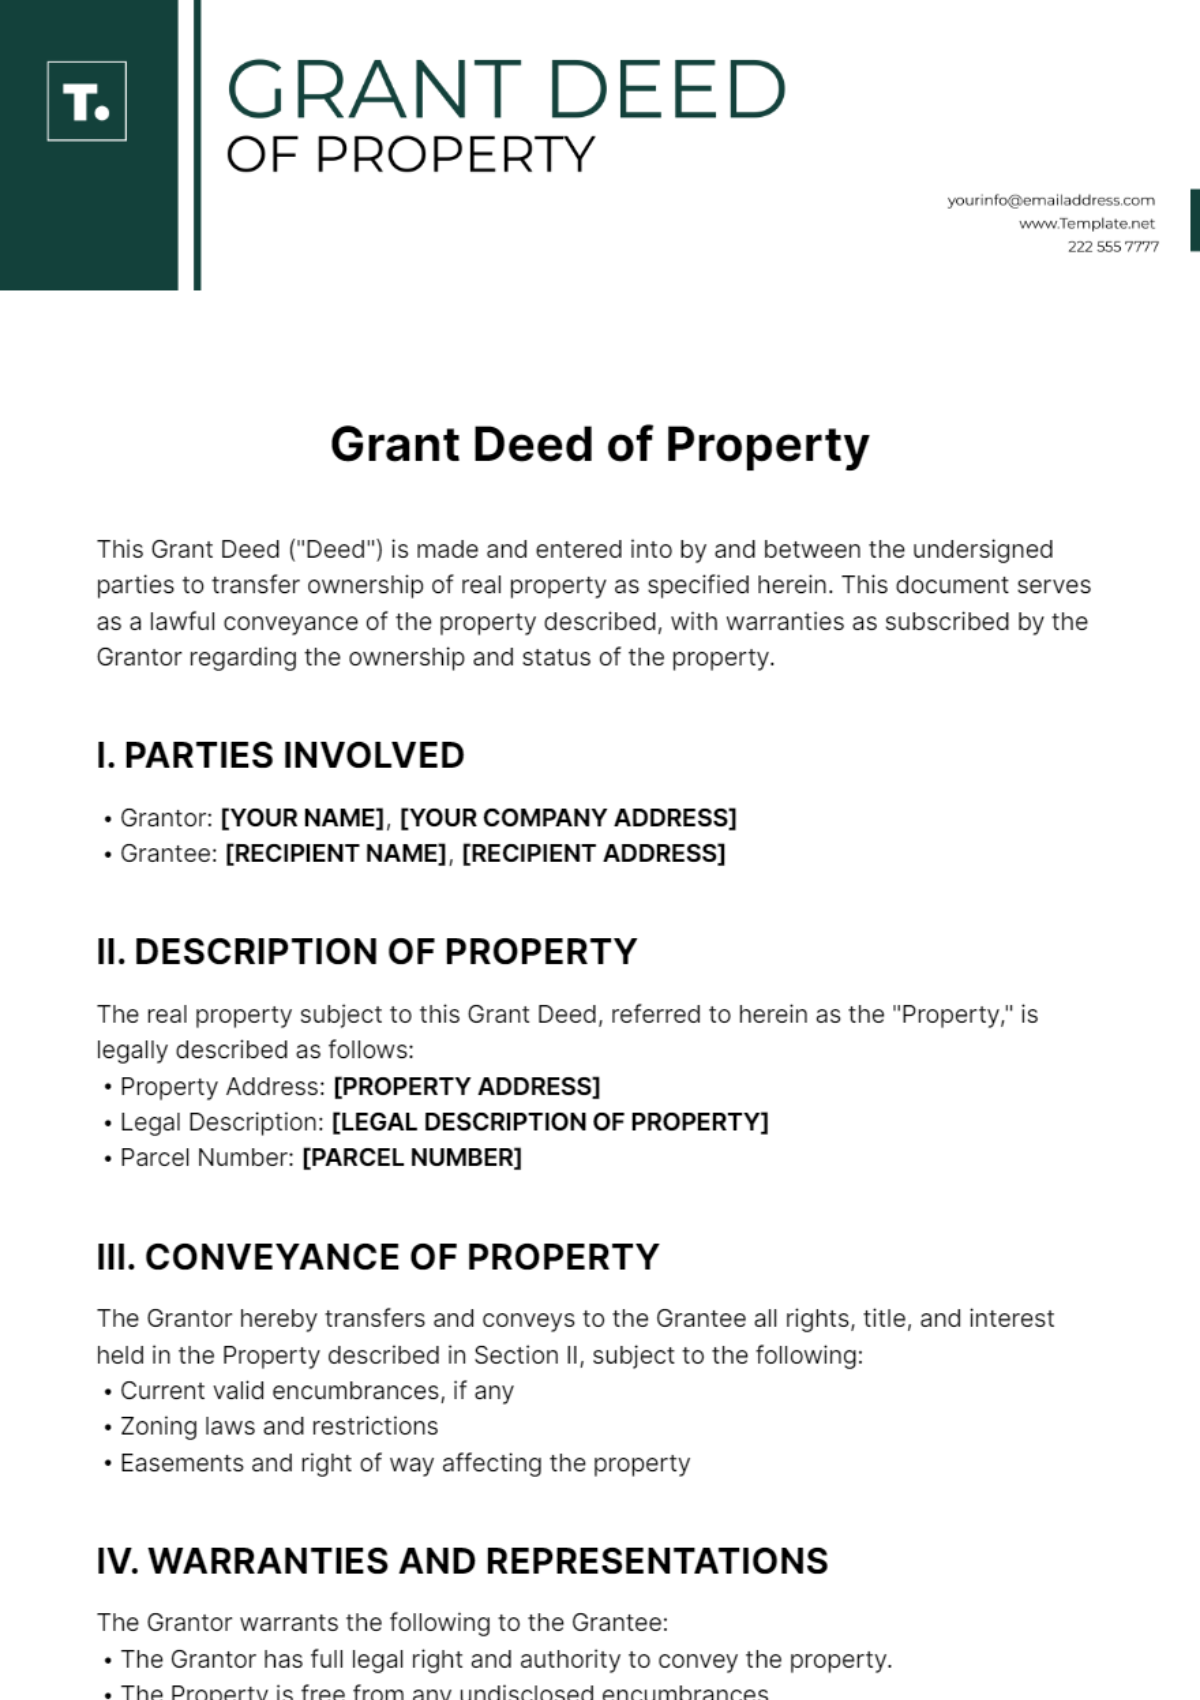 Free Grant Deed Property Template